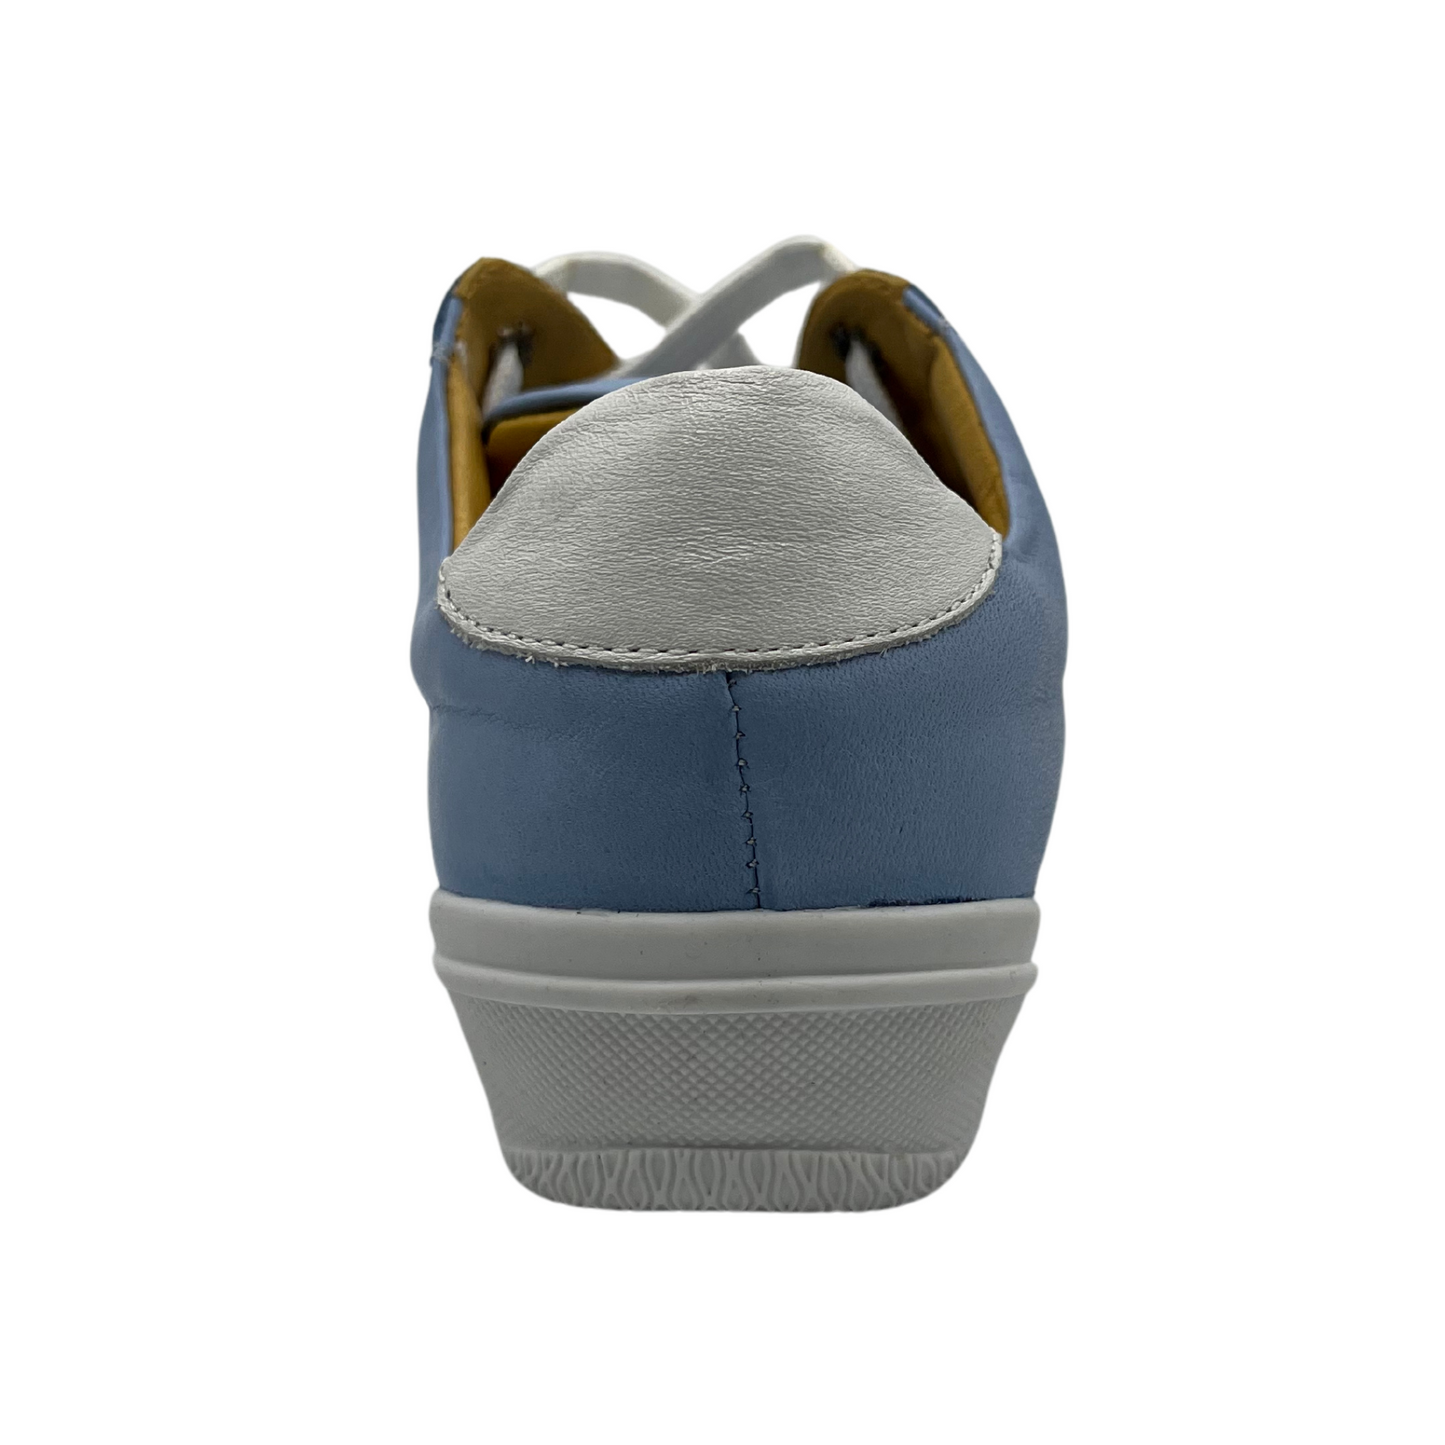 Back view of blue and white leather sneaker. It has tan leather lining and side zipper along laces. White rubber outsole and white leather toe cap.